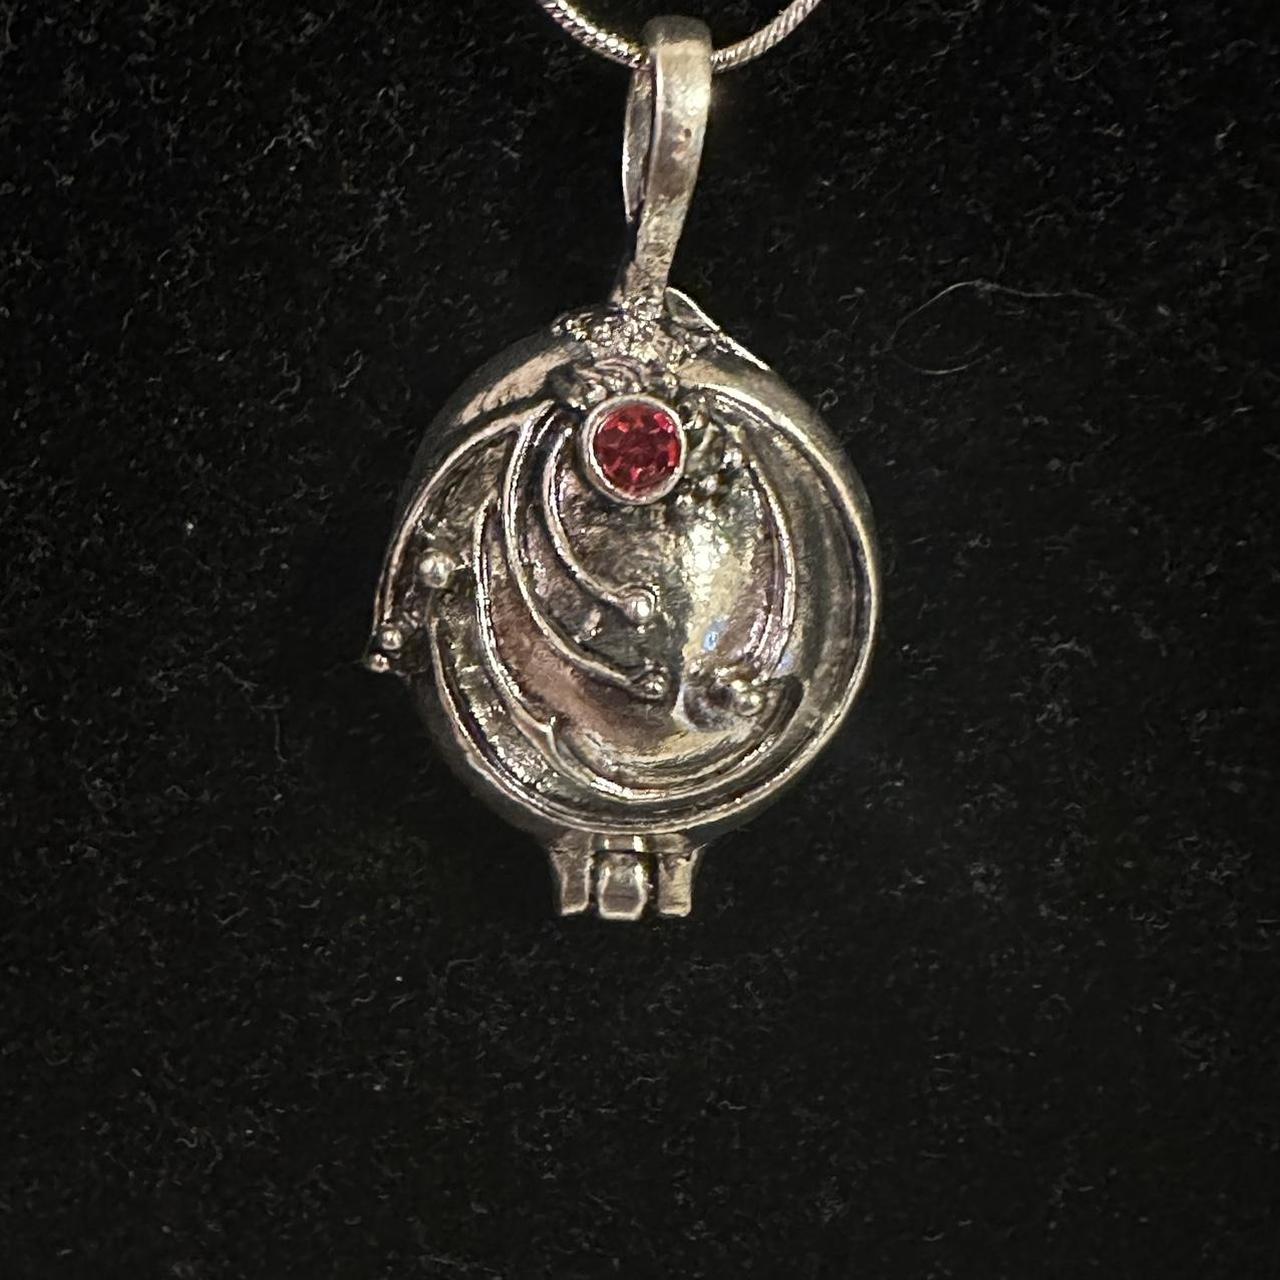 Elena's Blue Frost Pendant - As seen on The Vampire Diaries - Jewelry